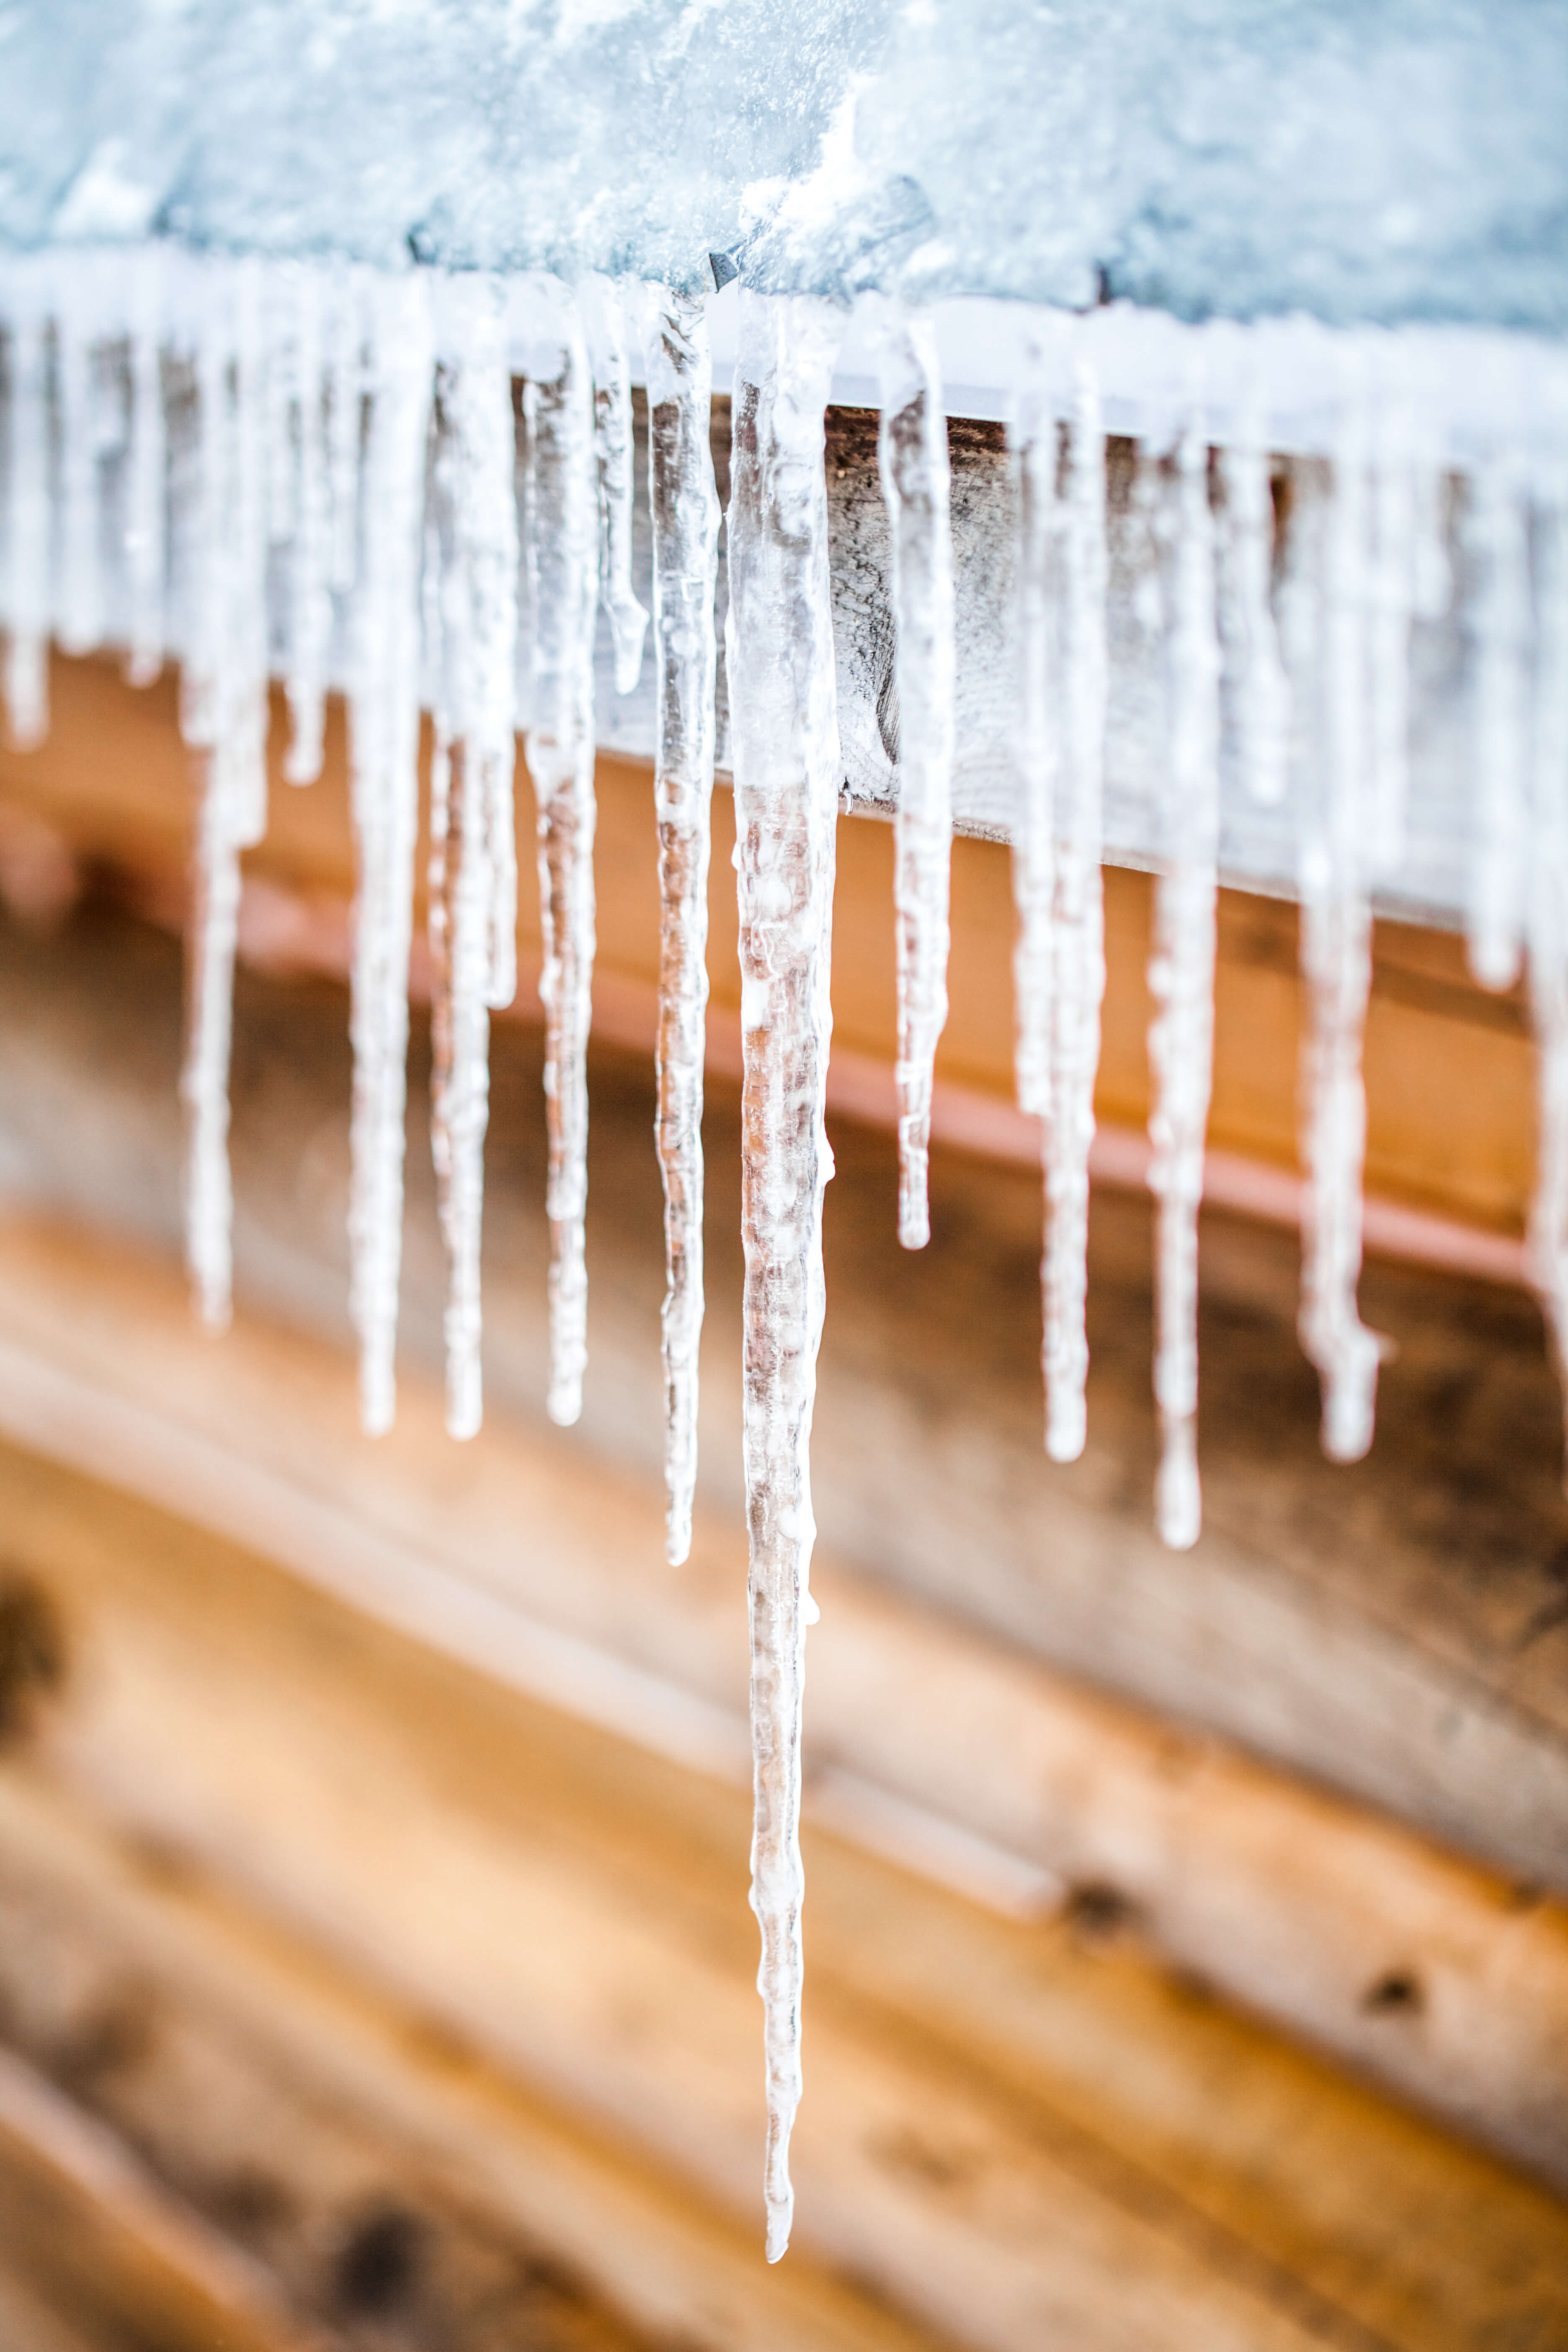 Long Icicles Melting of a Log Wood Chalet roof top